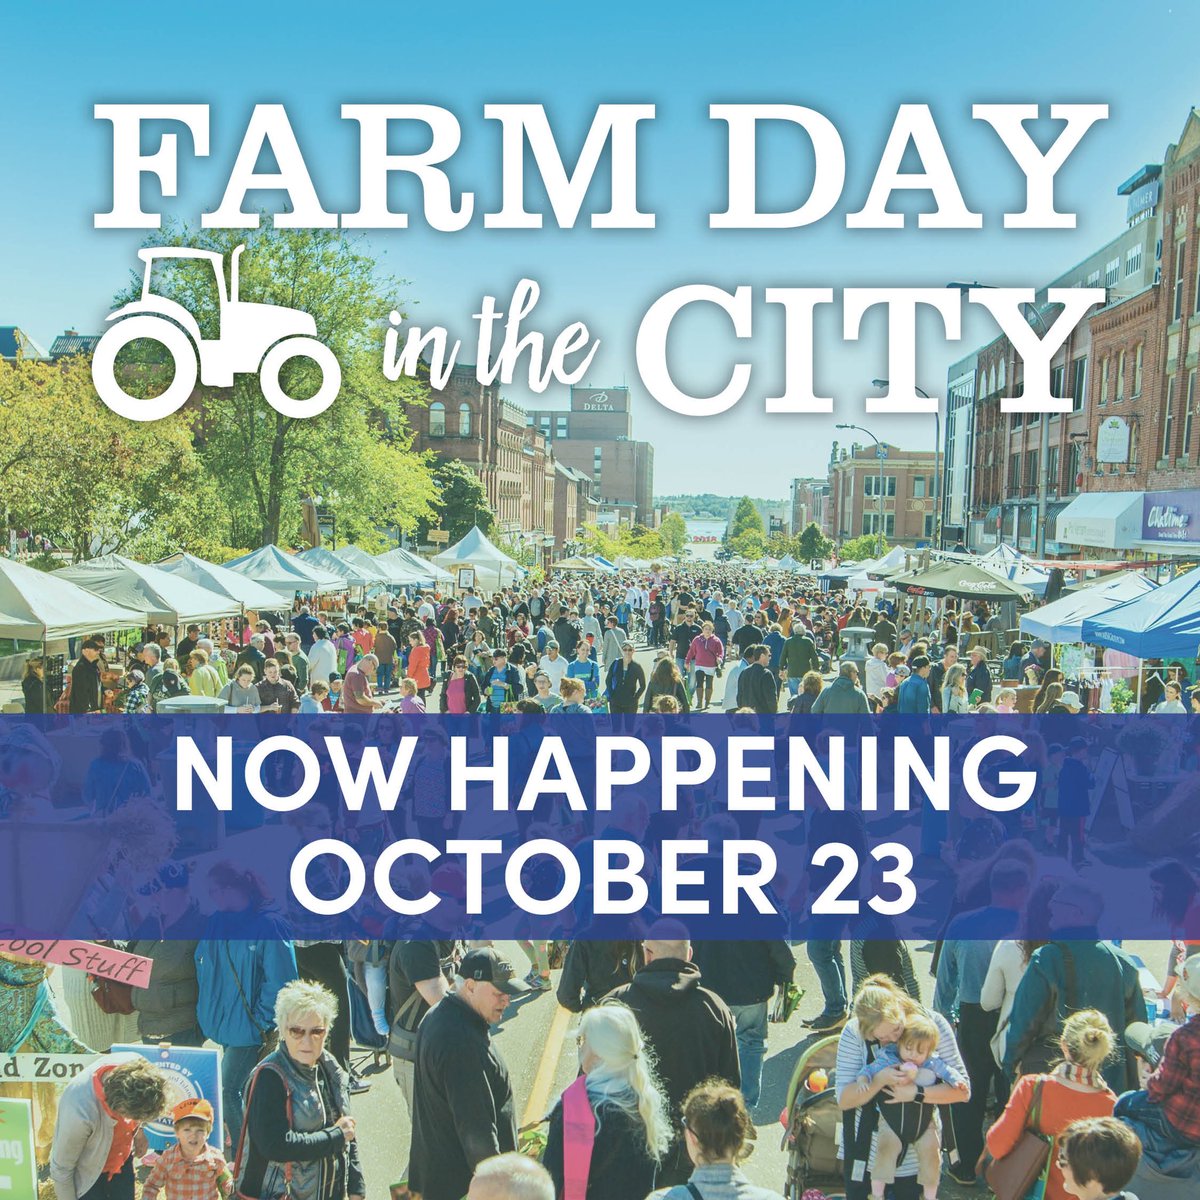 Farm Day = rescheduled for Oct. 23 🌻 It’s a difficult and sensitive time for many that are going through hardship, but we’re looking forward to offering this opportunity to connect as a community on Queen St and support our local vendors in a few weeks’ time. More info to come!